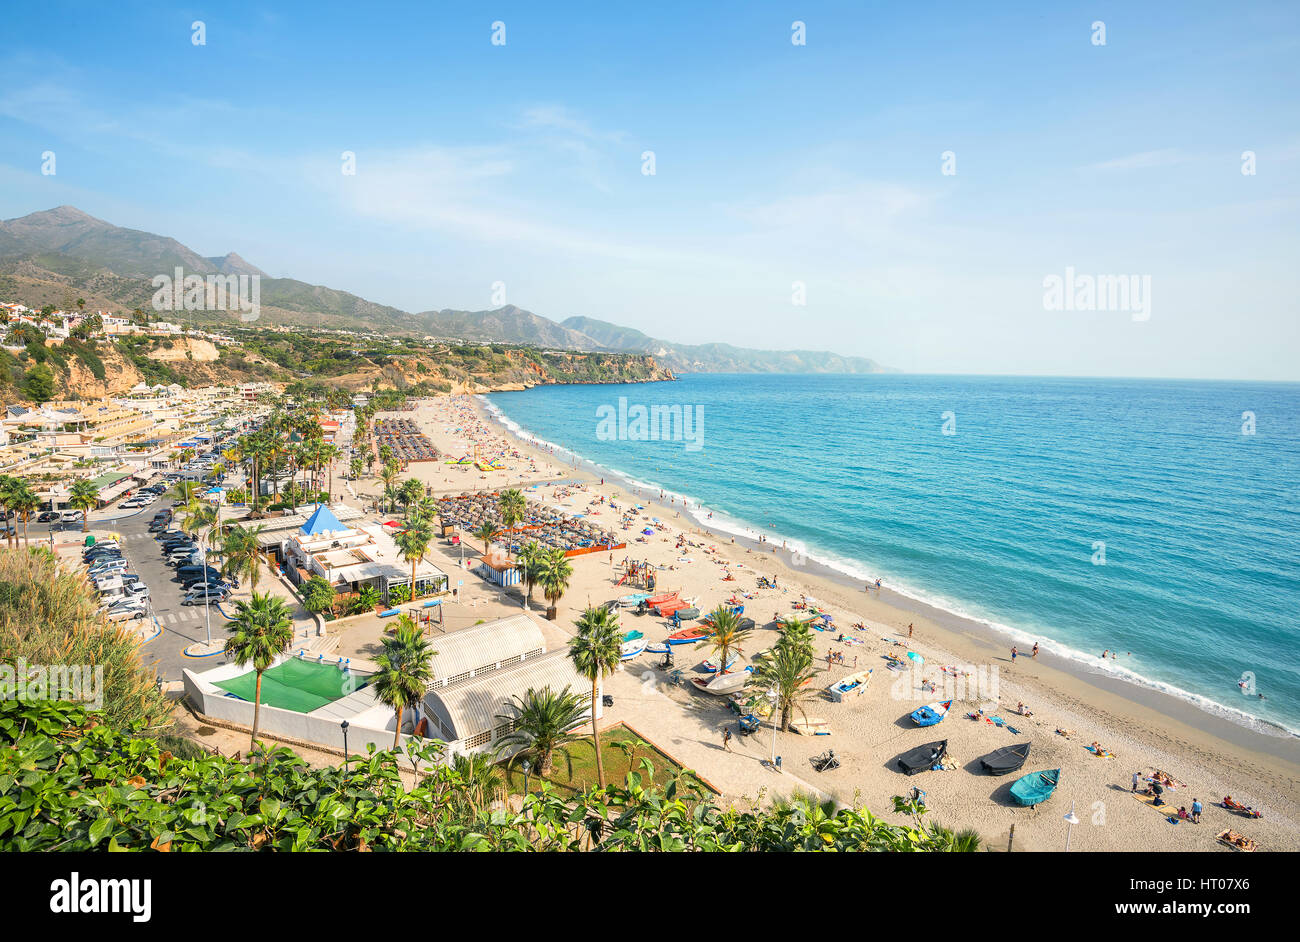 View of beach in Nerja. Malaga province, Costa del Sol, Andalusia, Spain Stock Photo